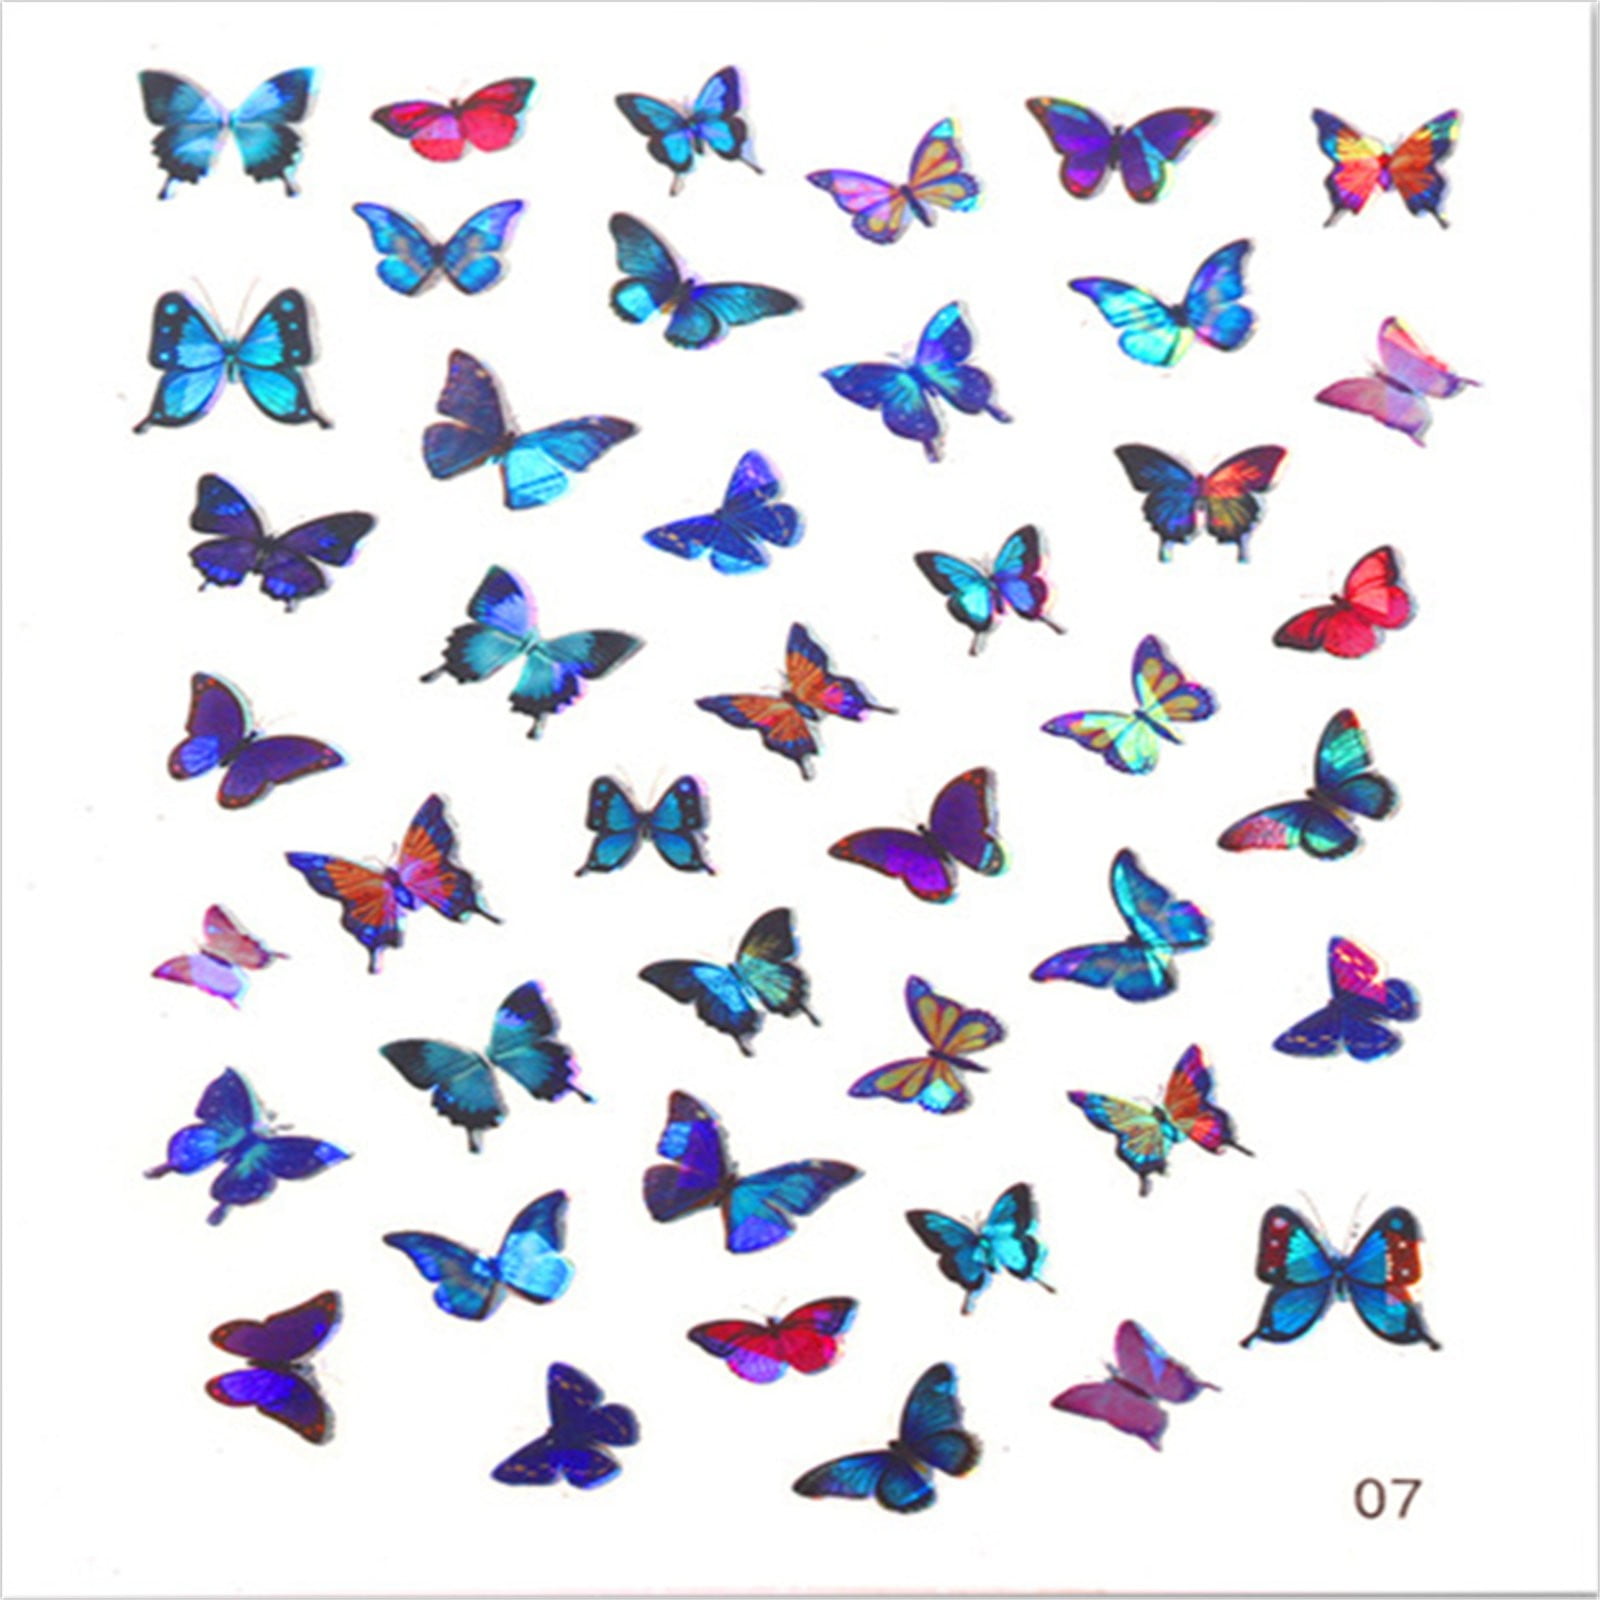 Abkekeiui Butterfly Nail Stickers 3D Self Adhesive Nail Decals Colorful ...